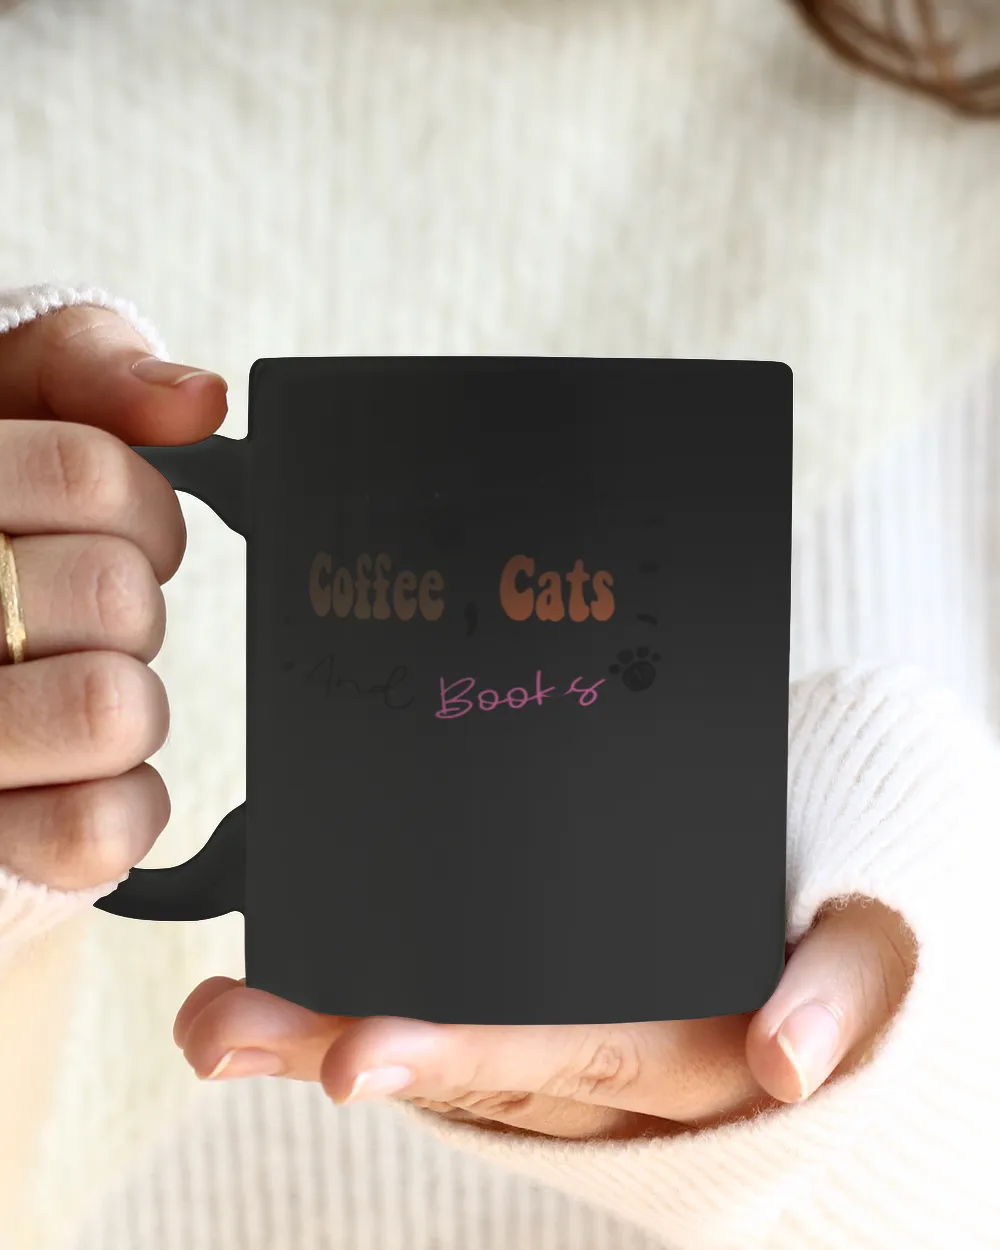 Life Is Better With Coffee Cats And Books  Cat Coffee  Cats And Books  Cat Lover  Cat Mom  Cute Cat 7781 T-Shirt